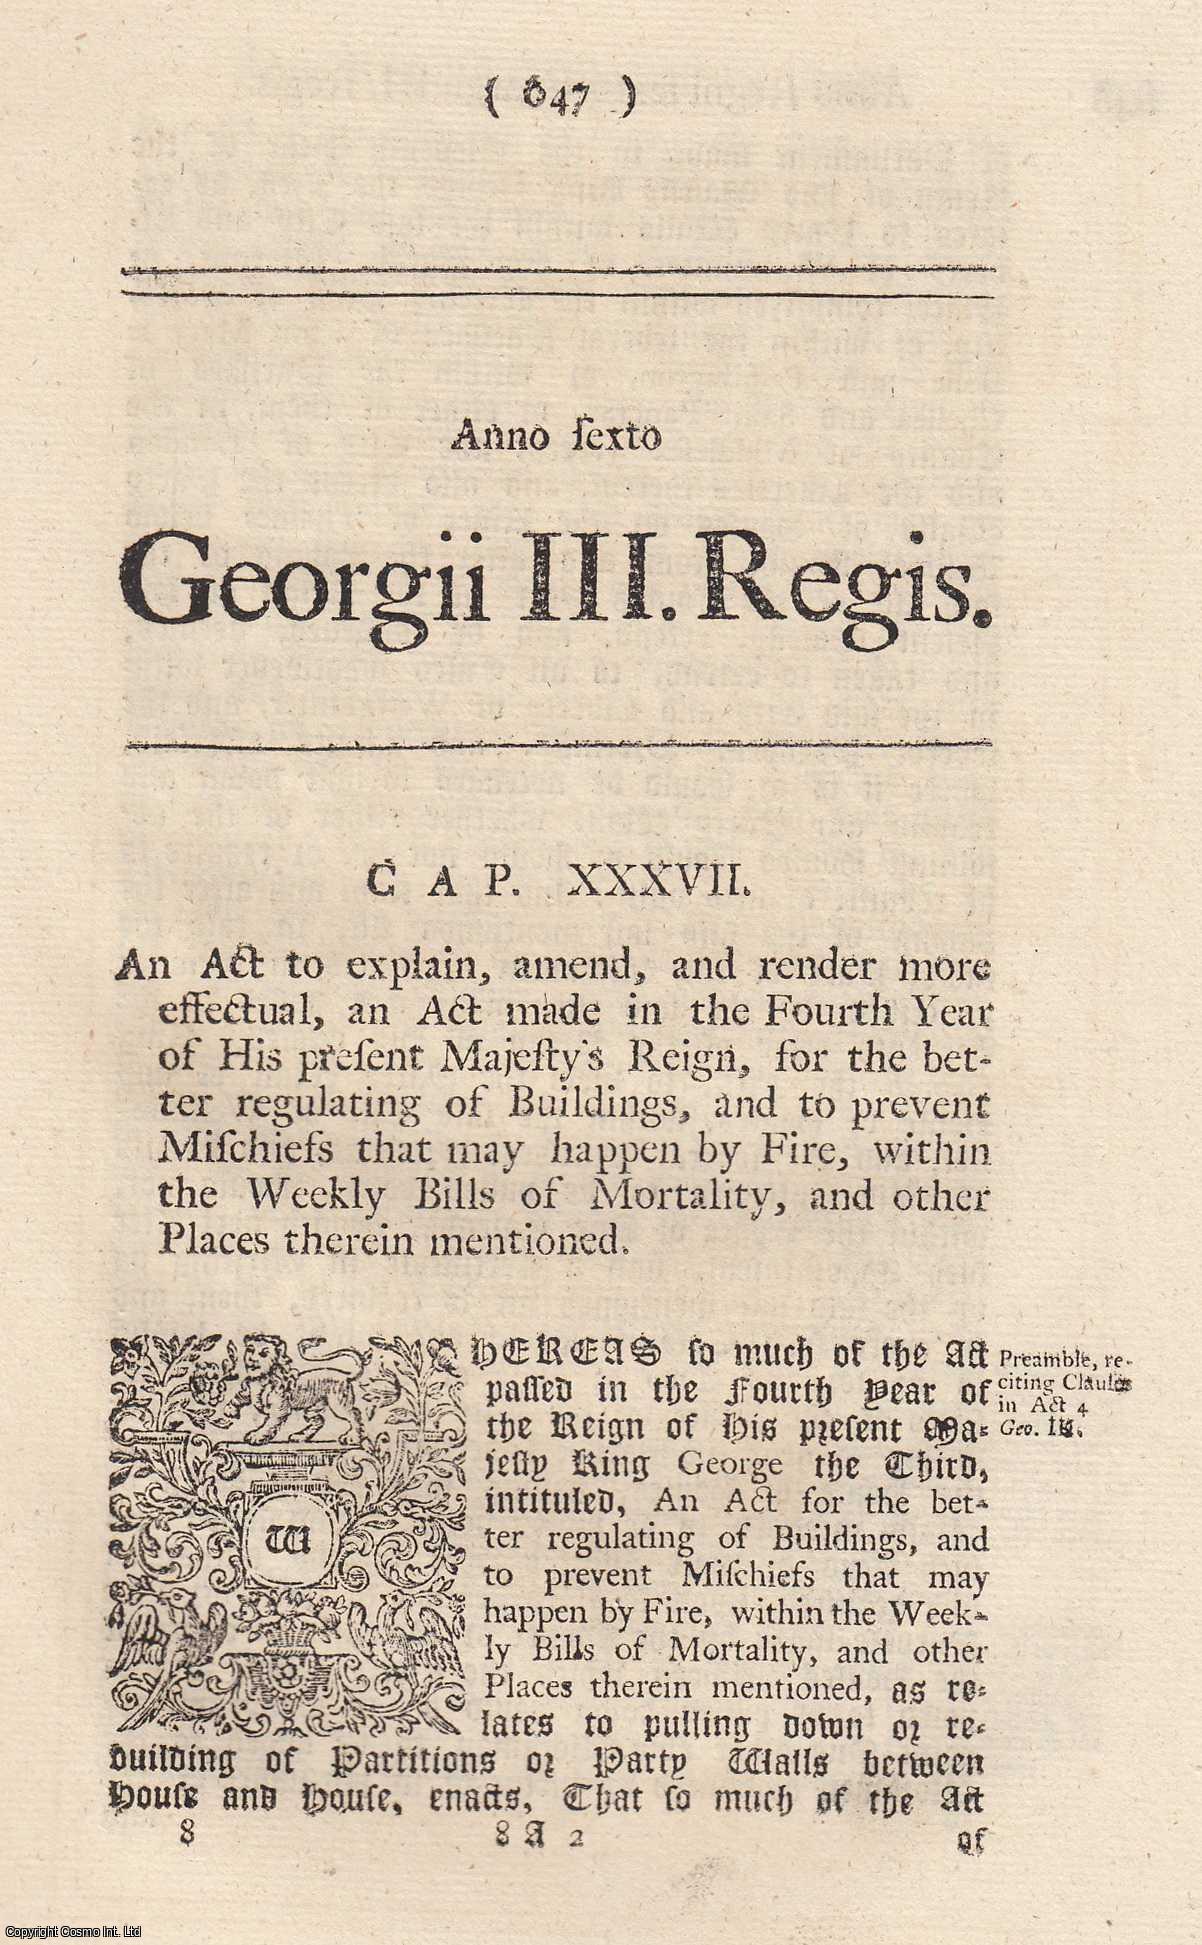 King George III - 1766. Cap. Xxxvii. An Act for The better Regulating of Buildings, and to Prevent Mischiefs that may happen by Fire.